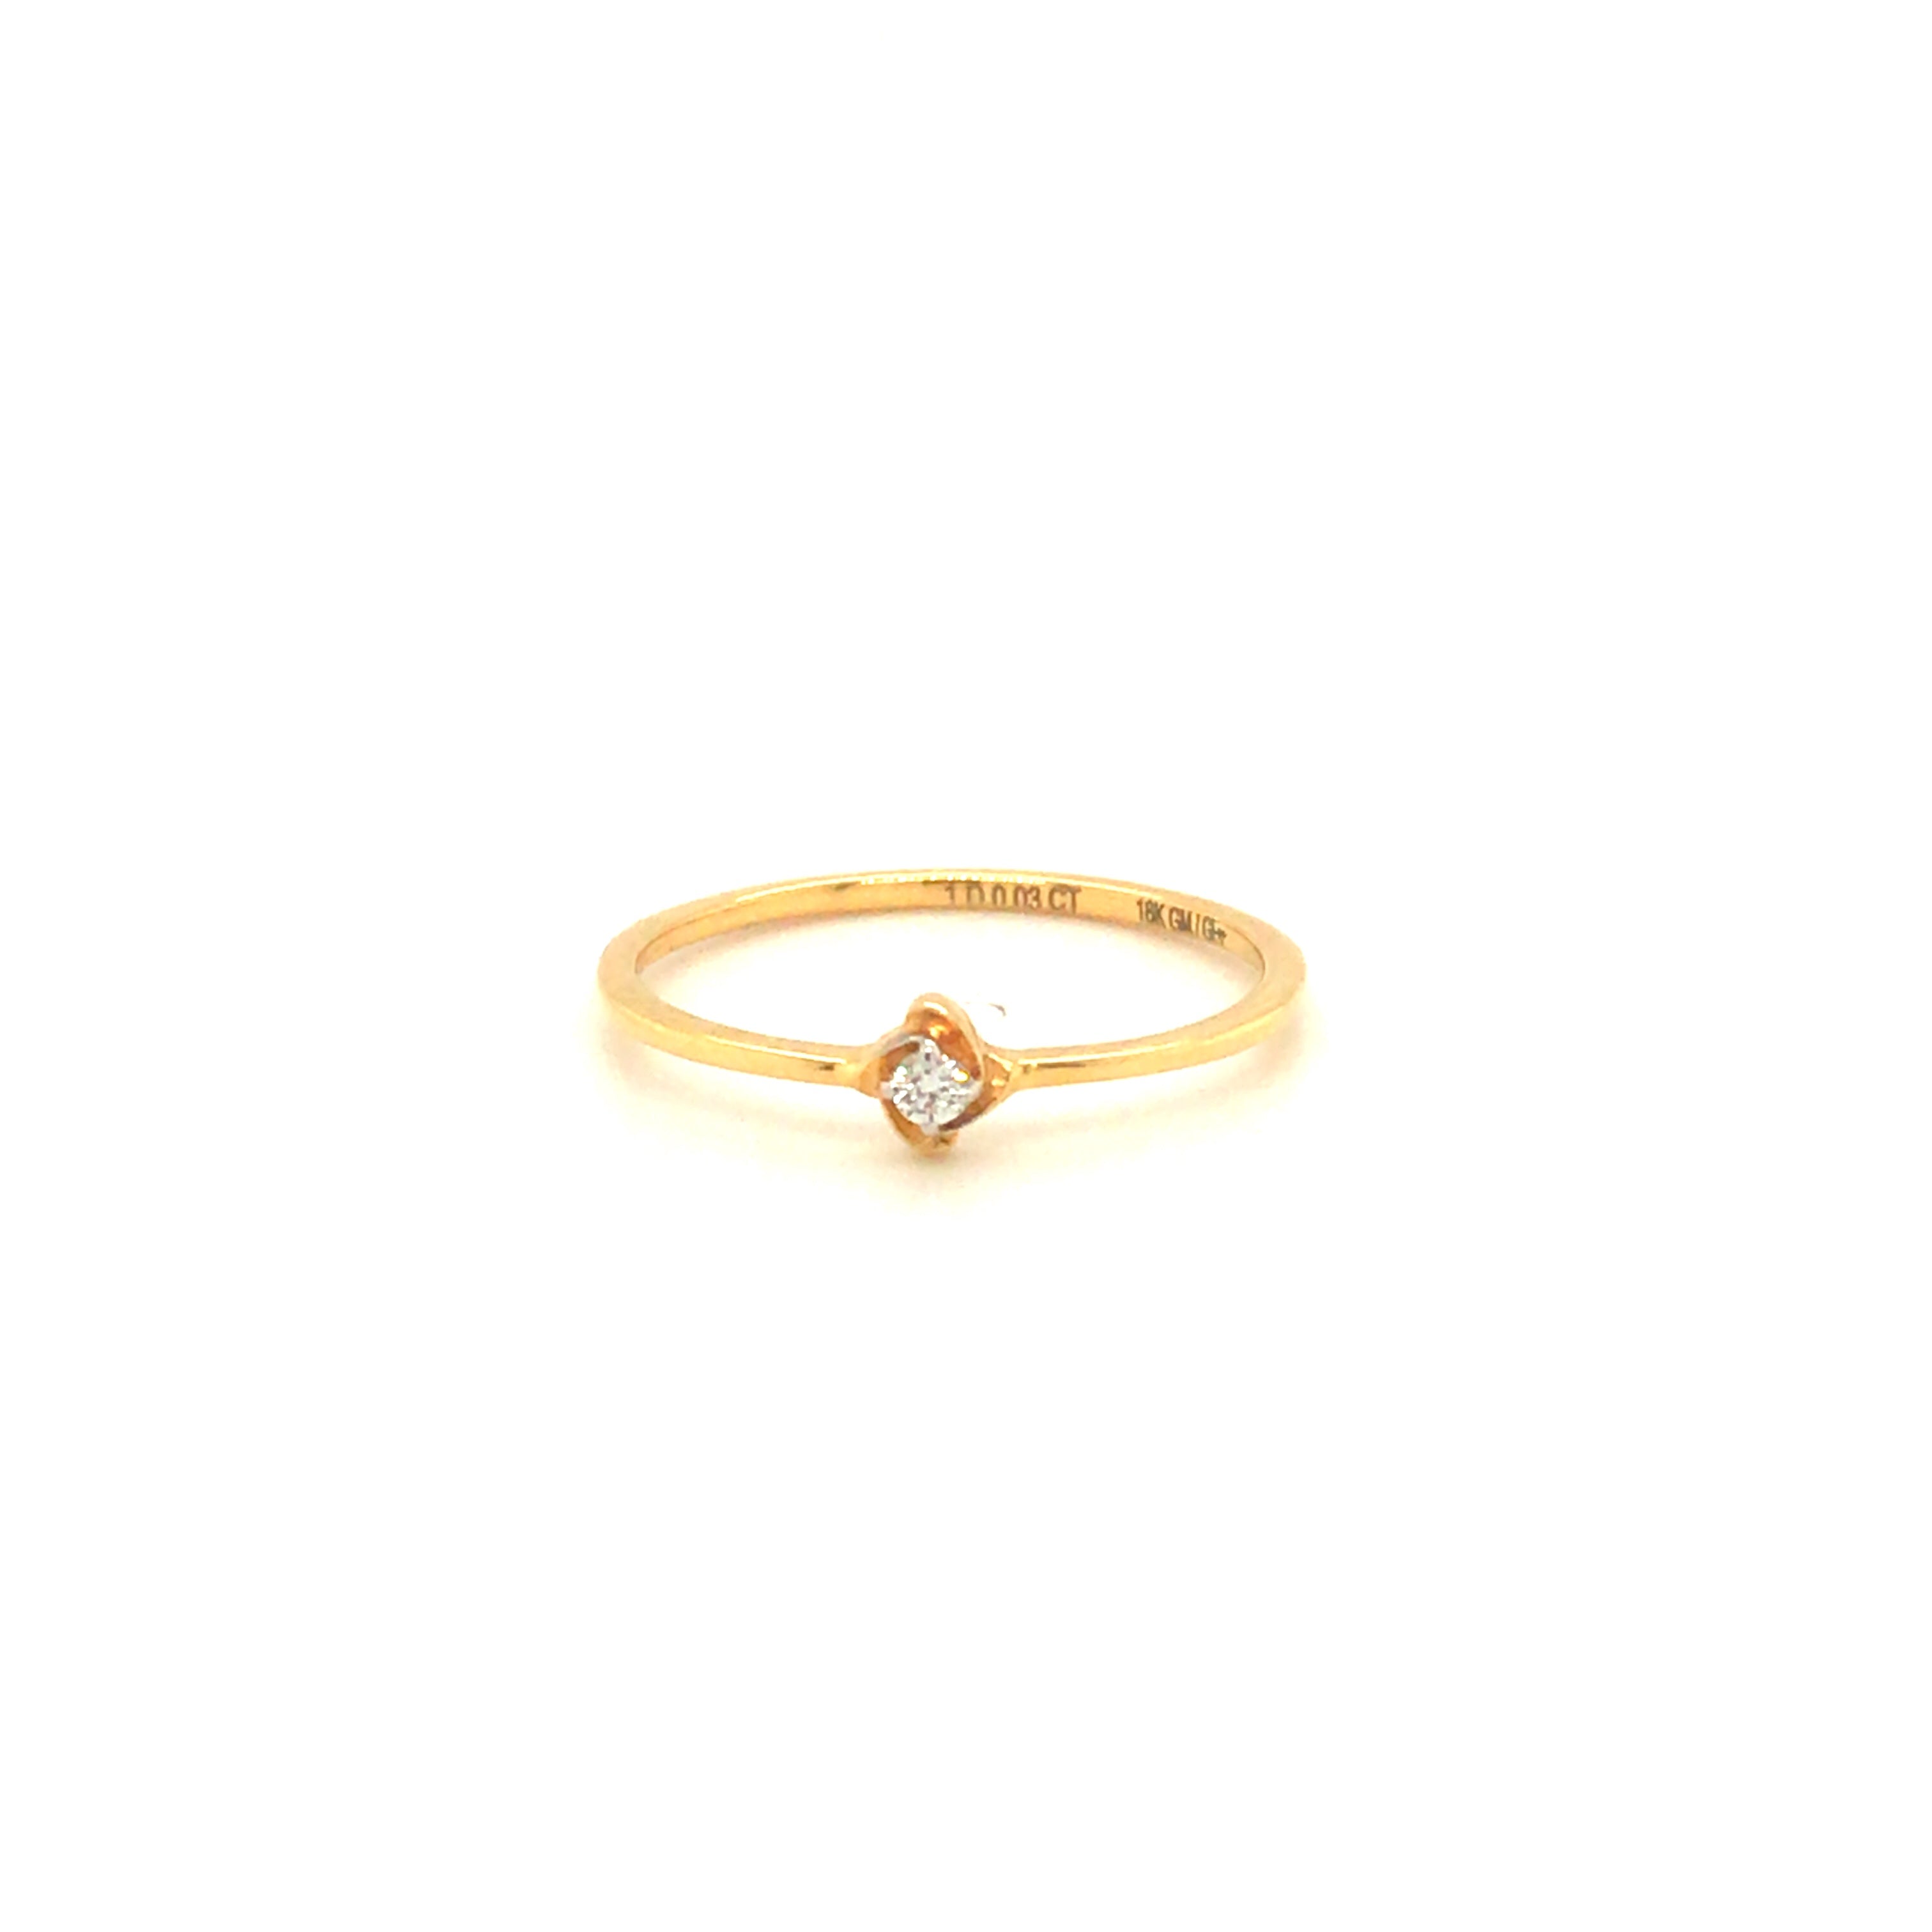 Engagement Ring Couple Gold | Simple Gold Ring Design For Women | Latest Gold  Ring Design … | Simple engagement rings, Vintage engagement rings simple, Rings  simple